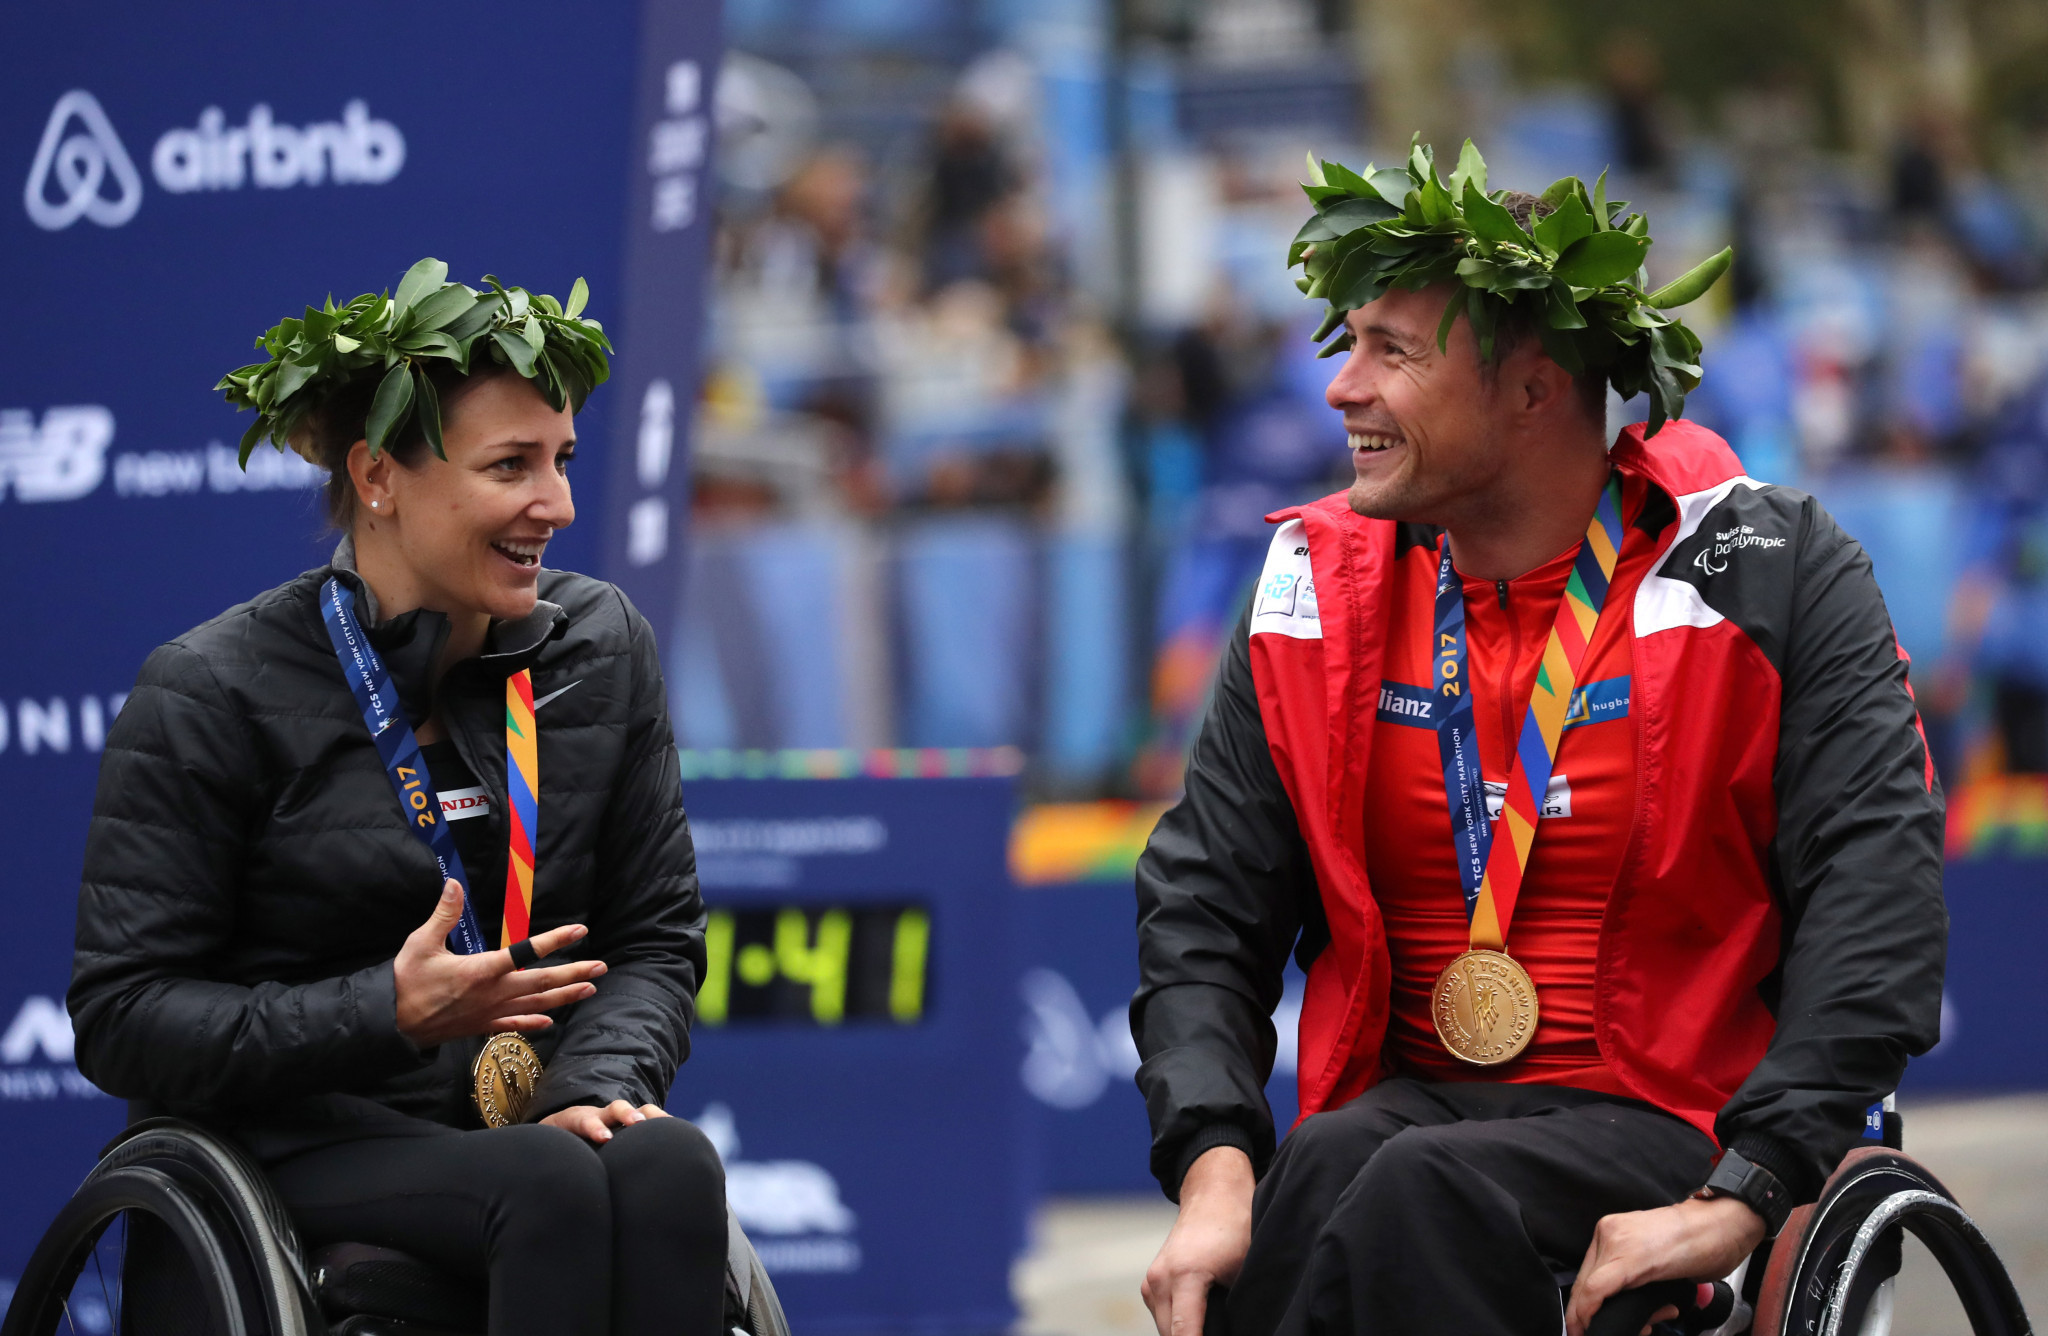 Manuela Schar of Switzerland, left, and Marcel Hug, also of Switzerland, celebrate winning the Professional Wheelchair Divisions during the 2017 New York City Marathon in the United States ©Getty Images